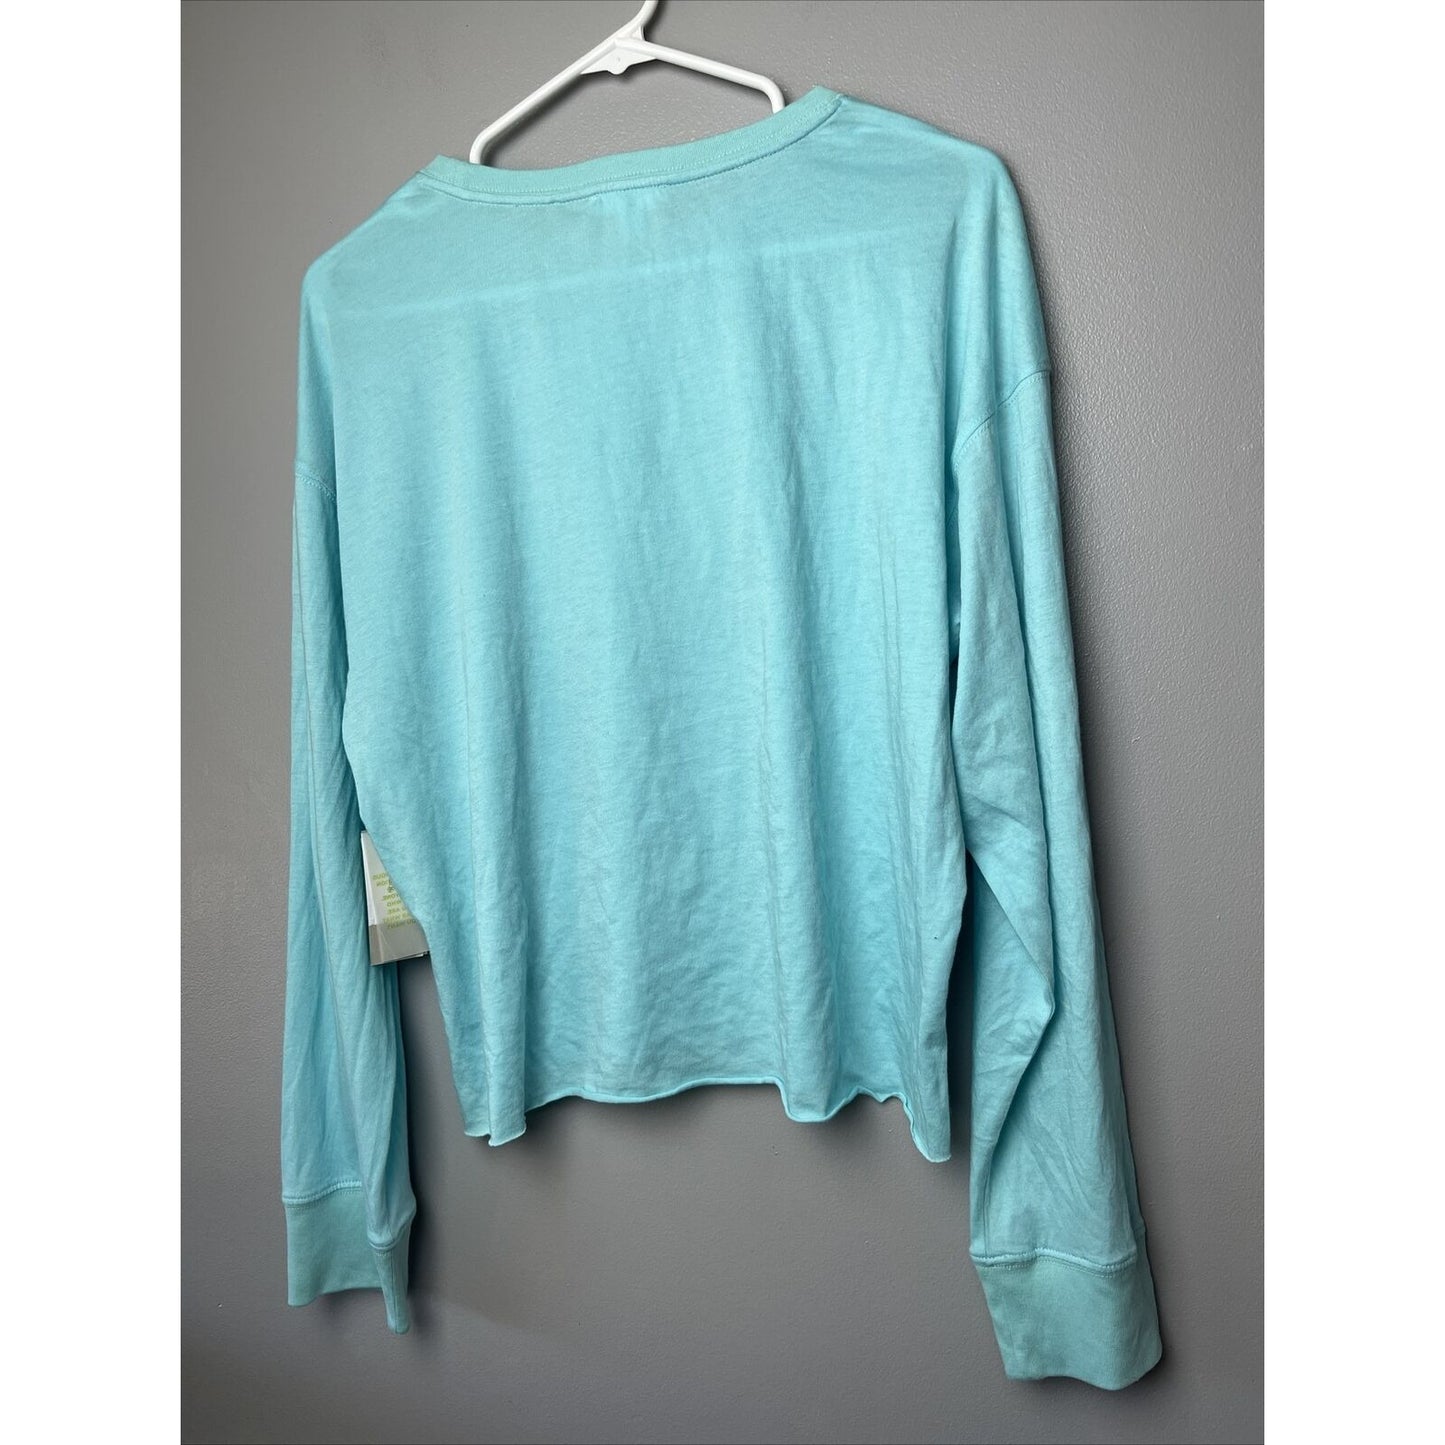 BP. Long Sleeve Blue Raw Hem Crop Top "A Great Day To Be" Graphic T Shirt S NWT